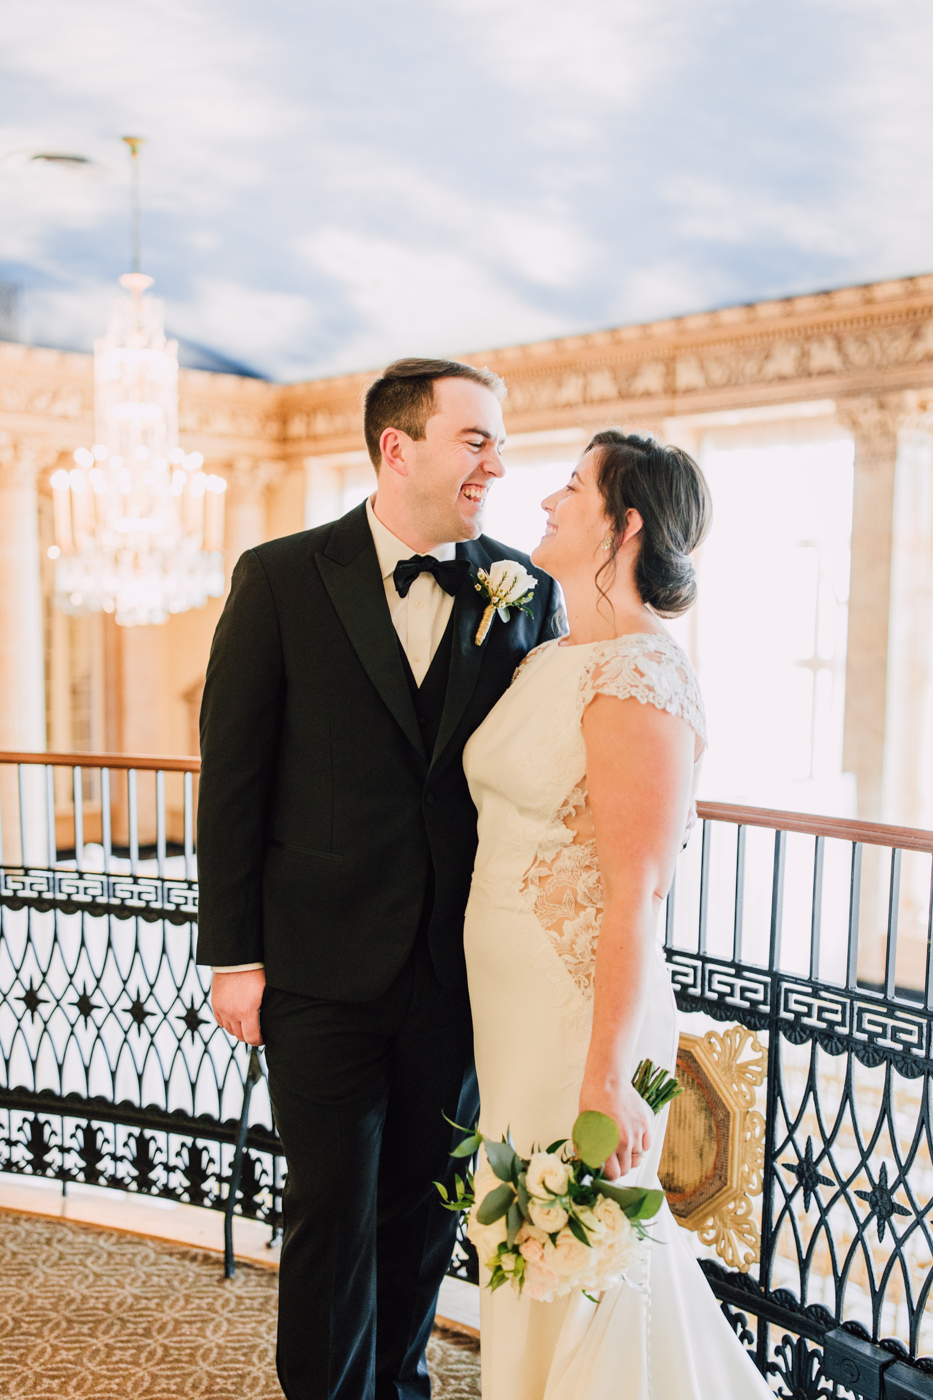  Bride and Groom smile at each other while posing for photos on a balcony at the Marriott Syracuse Downtown 